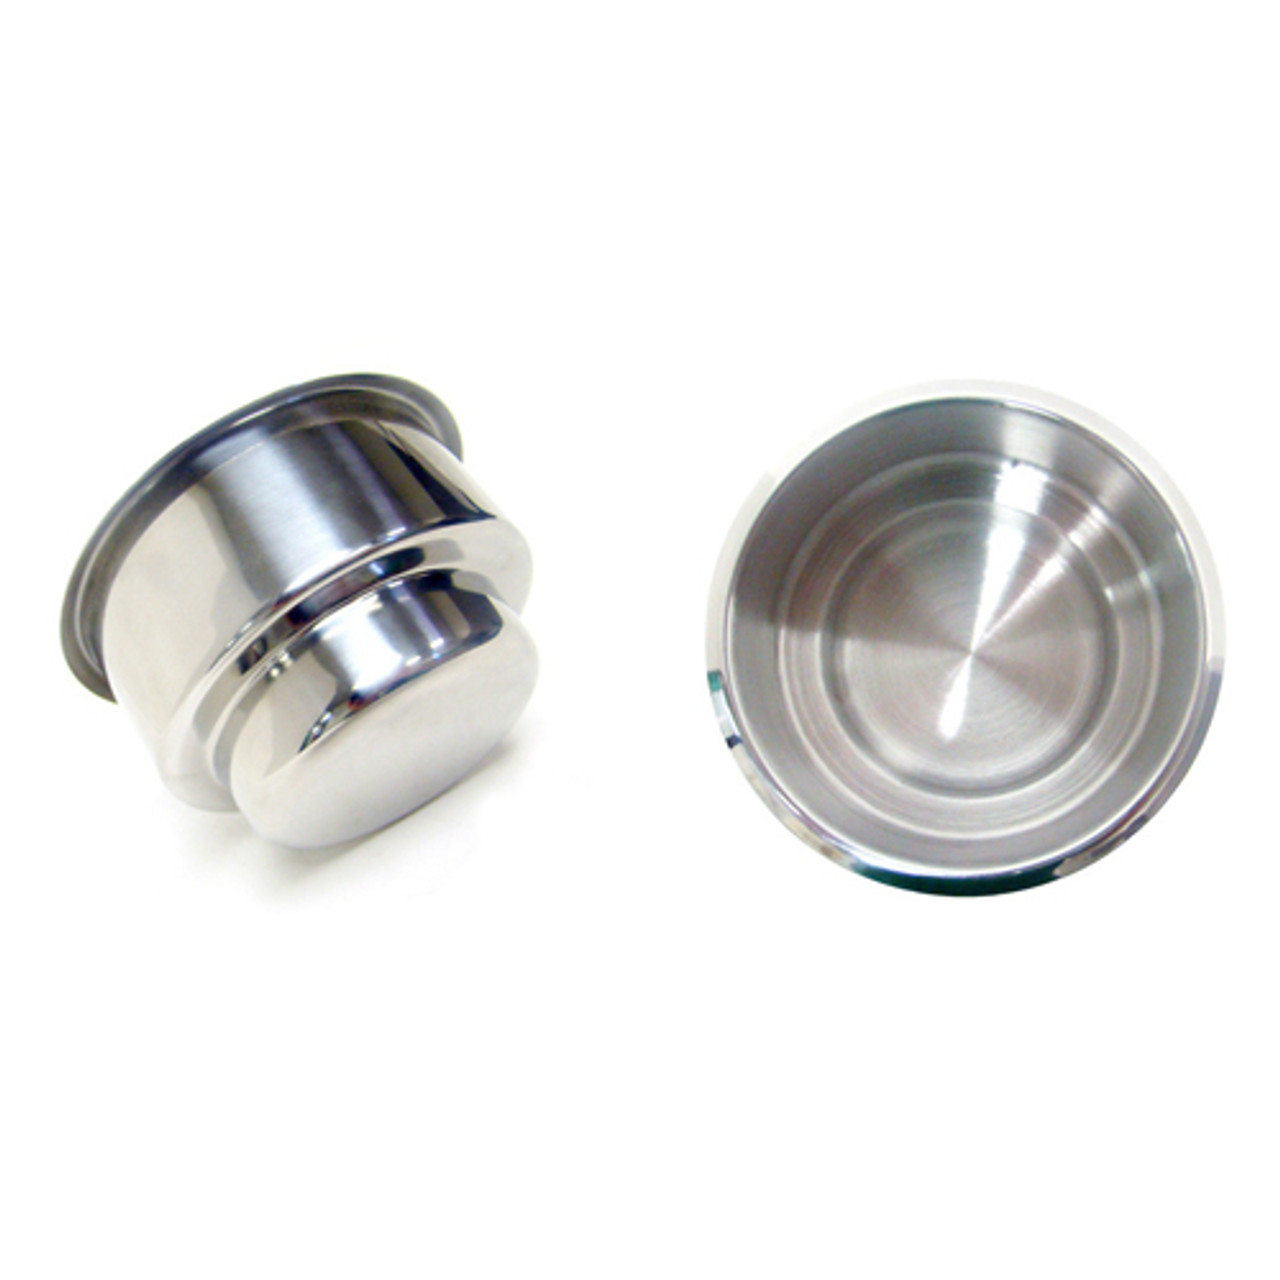 Dual Drop in Stainless Steel Cup Holder - Hobby Monsters